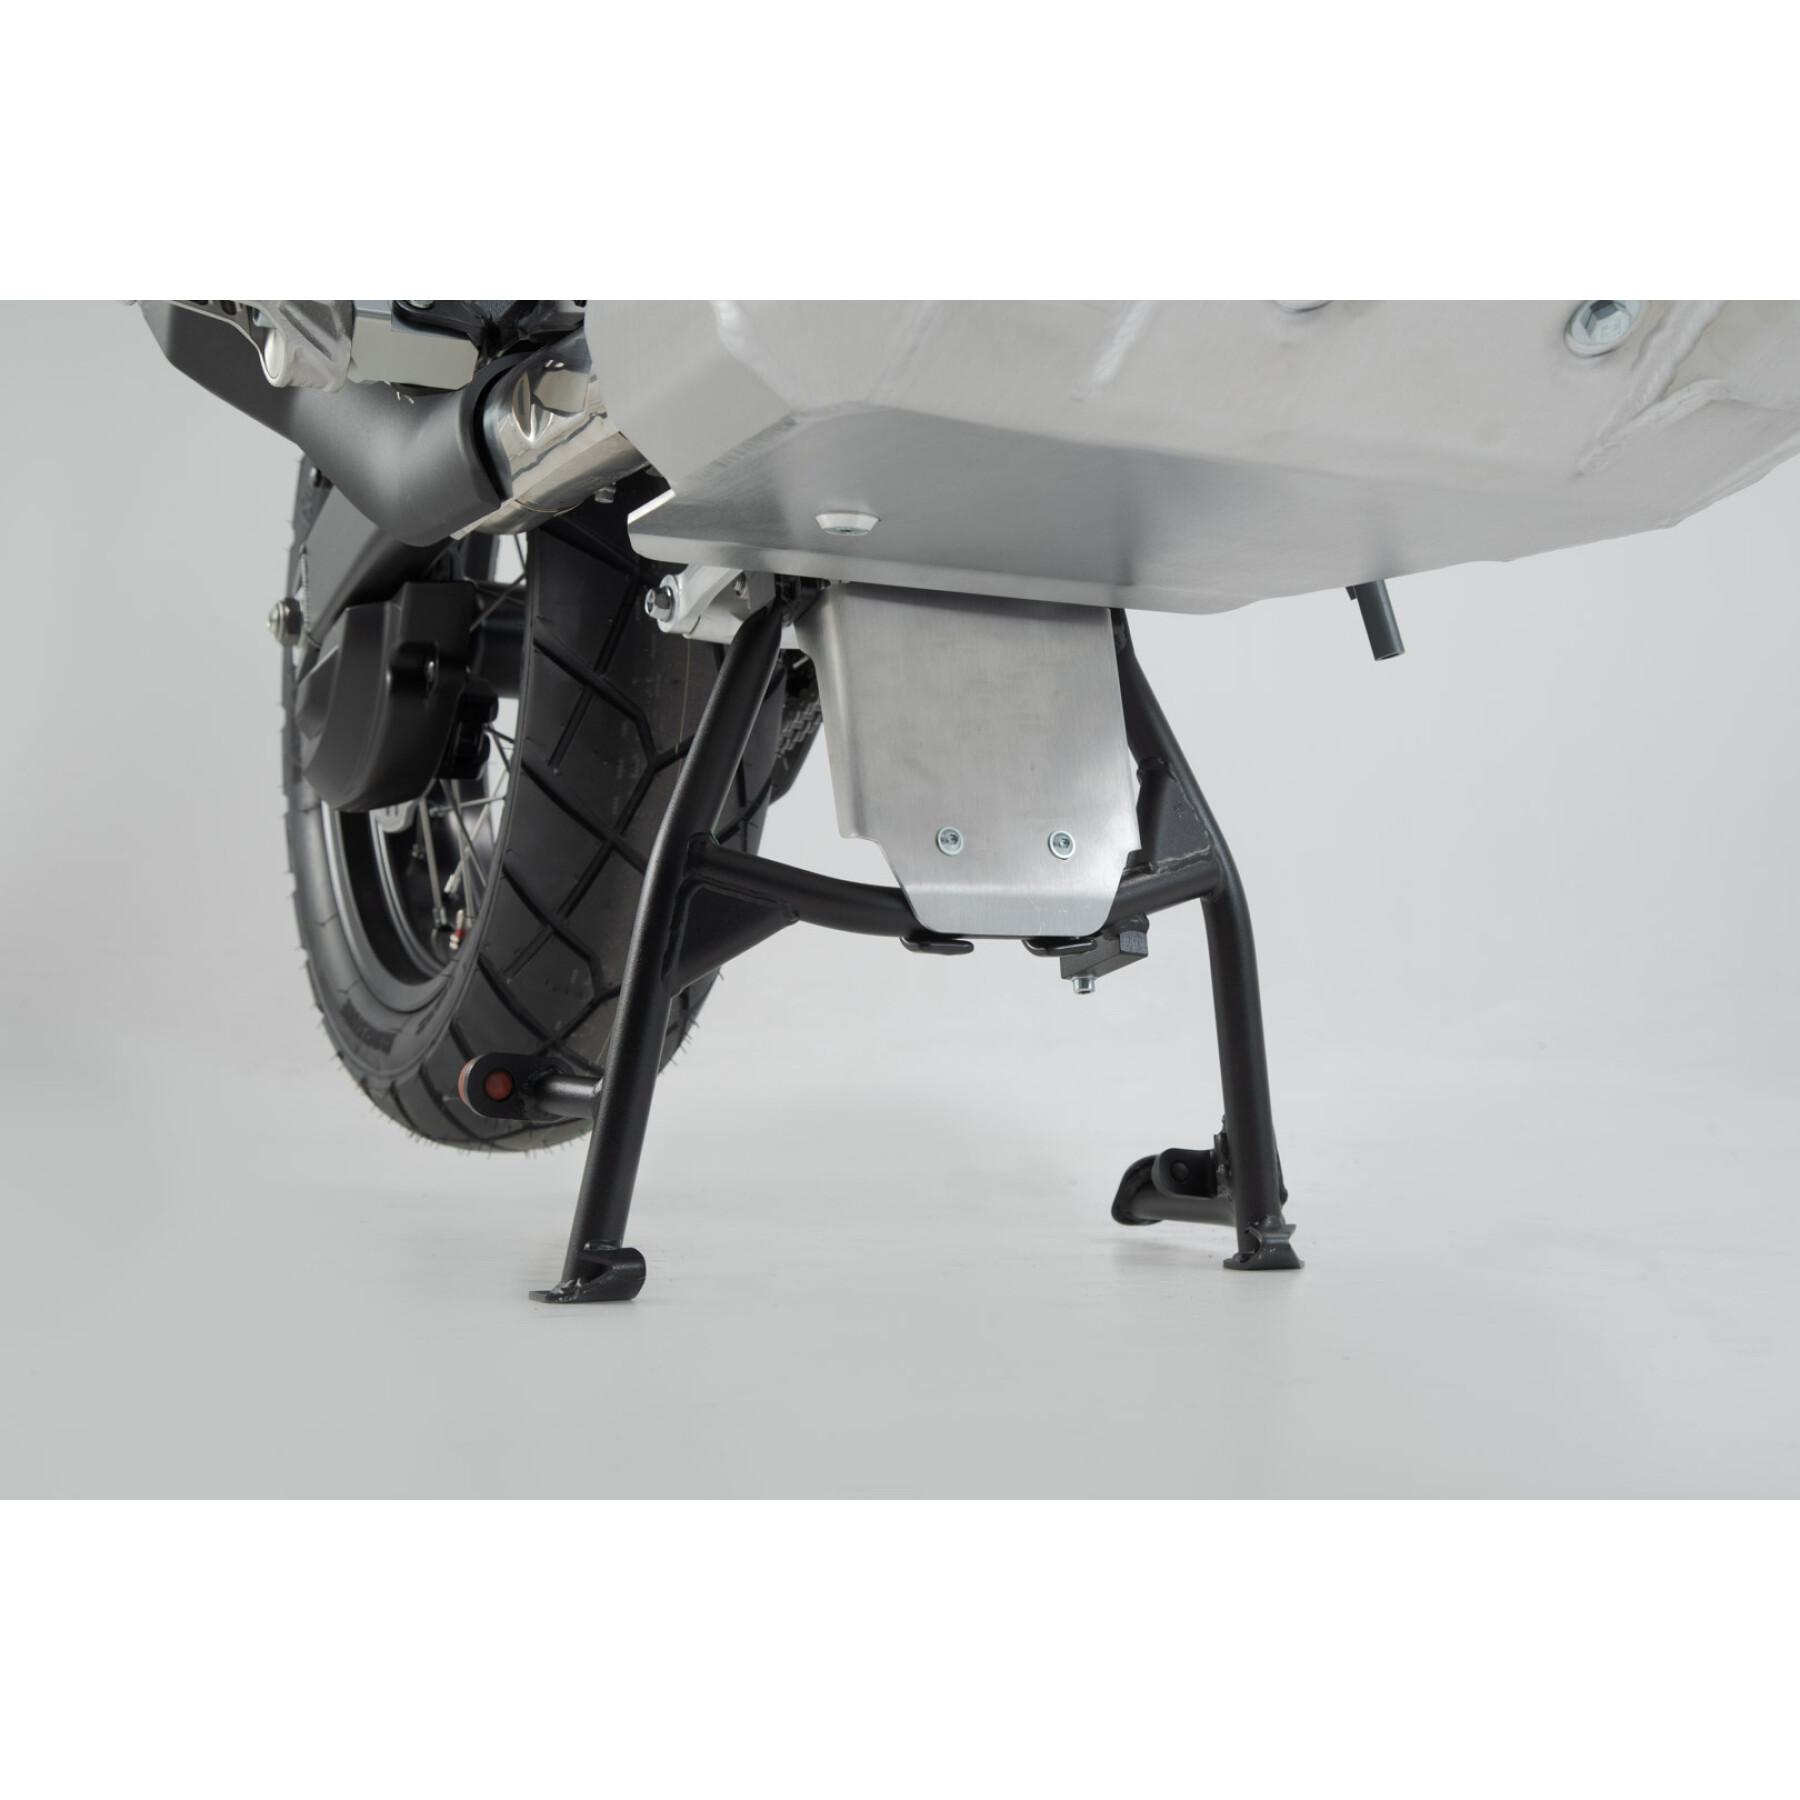 Center stand SW-Motech CRF1100L Africa Twin / Adv Sports (19-)